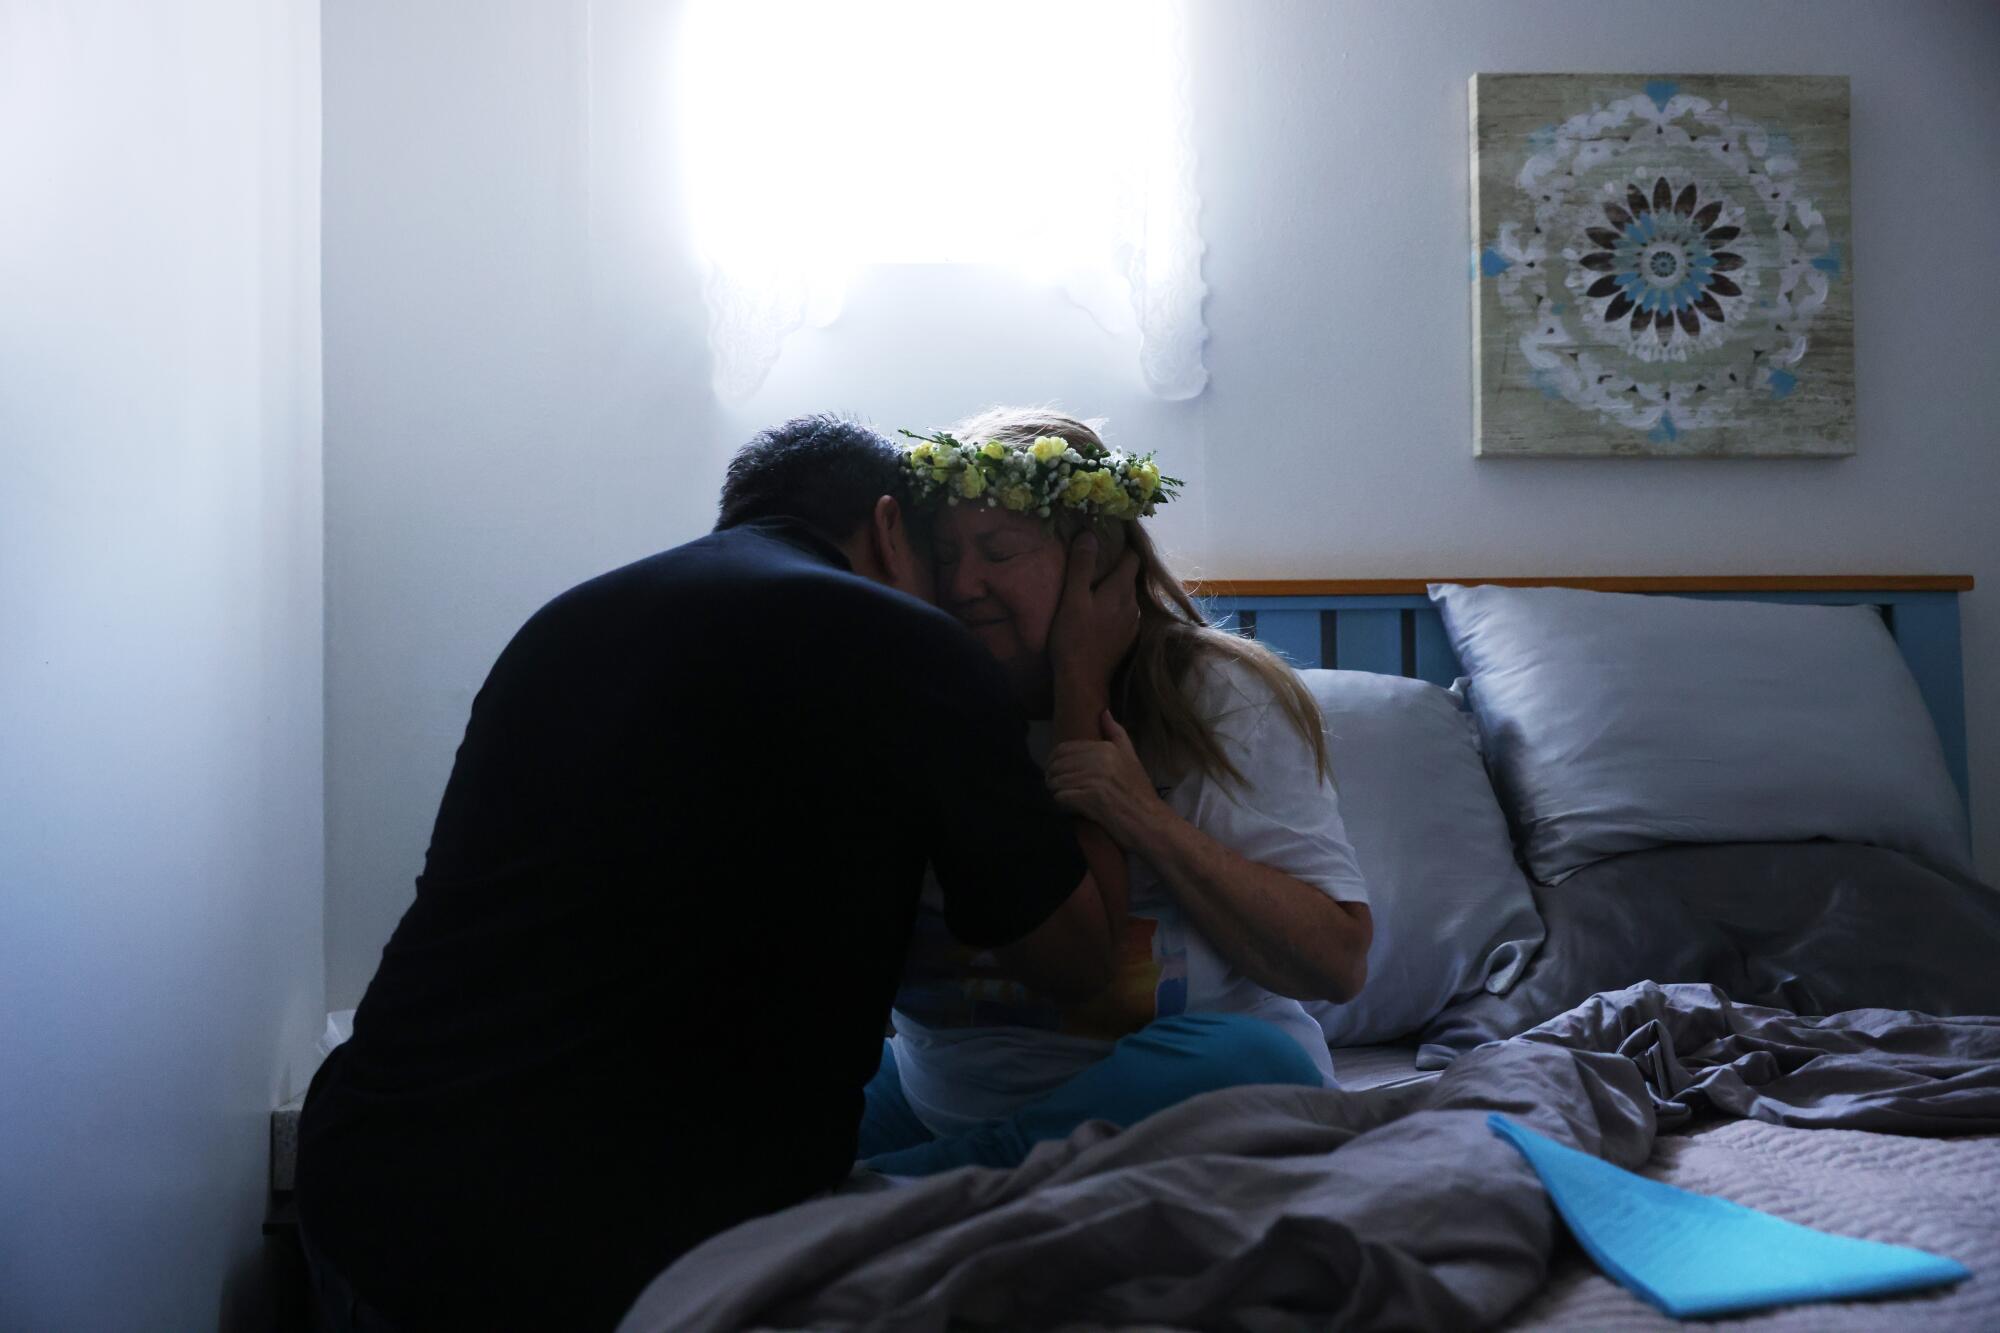 A person hugs a woman in a flower crown sitting in bed